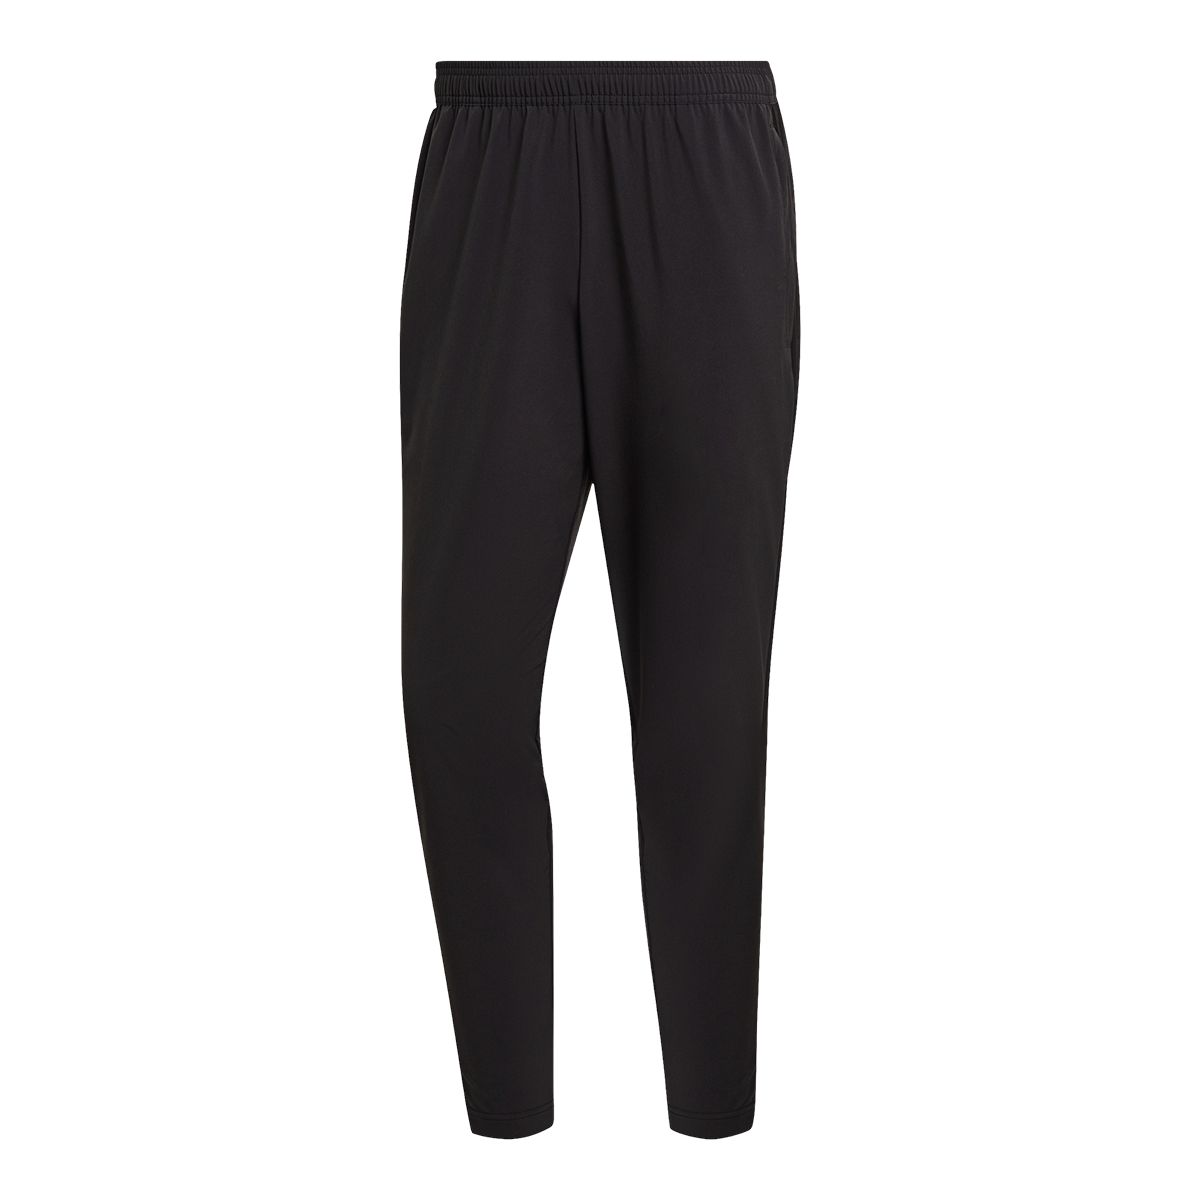 https://media-www.atmosphere.ca/product/div-03-softgoods/dpt-70-athletic-clothing/sdpt-01-mens/333458396/adidas-tiro-21-woven-7-8-pant-black-xs--e06c2e4a-e5ef-468d-9a9a-ffee646c8e01-jpgrendition.jpg?imdensity=1&imwidth=1244&impolicy=mZoom